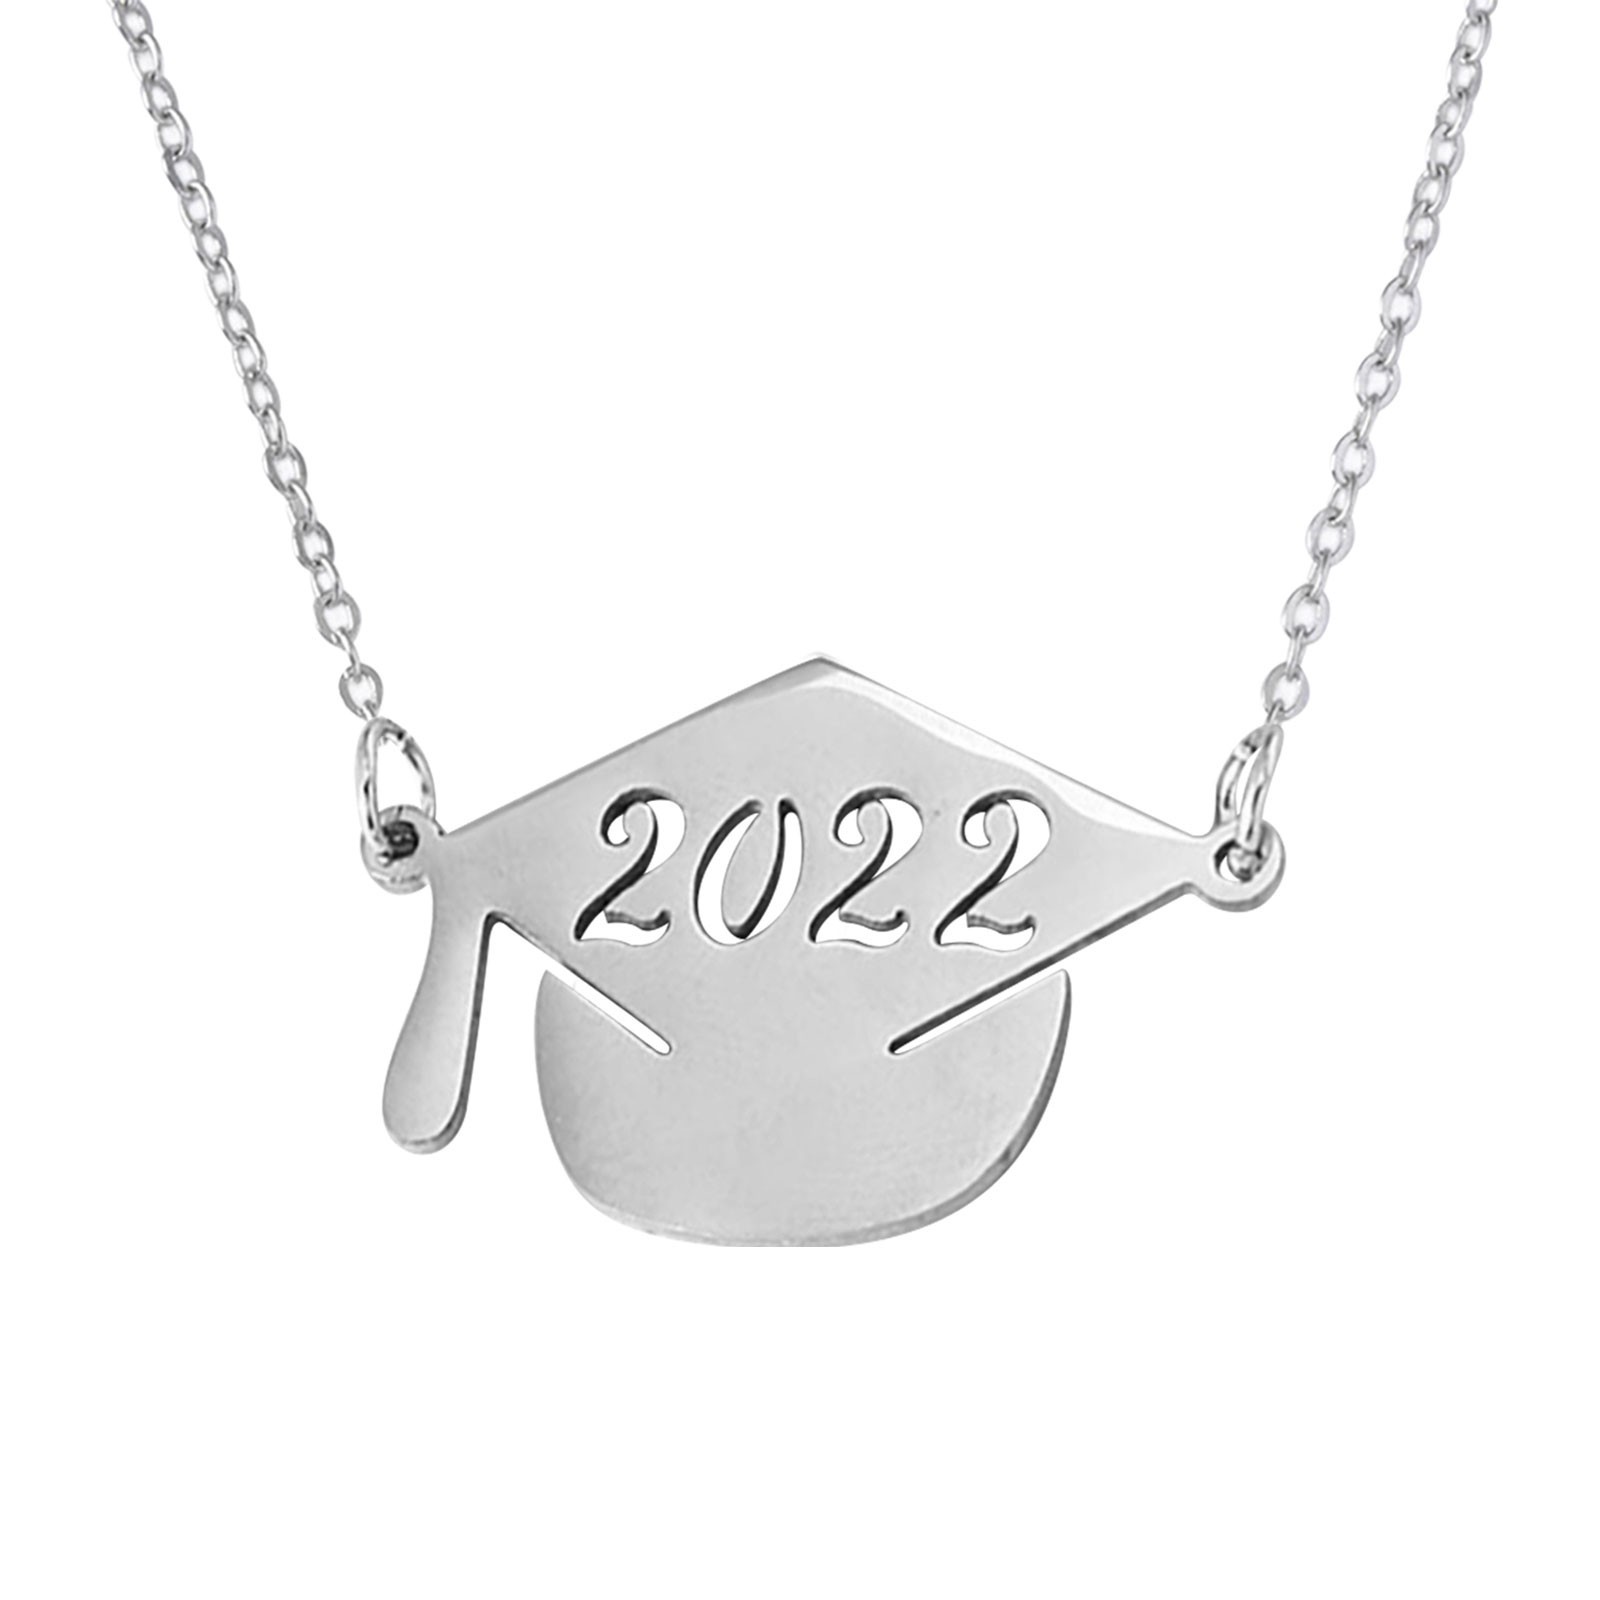 Apmemiss Clearance Graduation Gifts 2022 Graduation Gifts Pendant Necklace, Ladies Necklace Memorial Pendant Jewelry Gift, College Graduation Necklace Friendship Gifts For Her Graduation Decorations - image 2 of 8